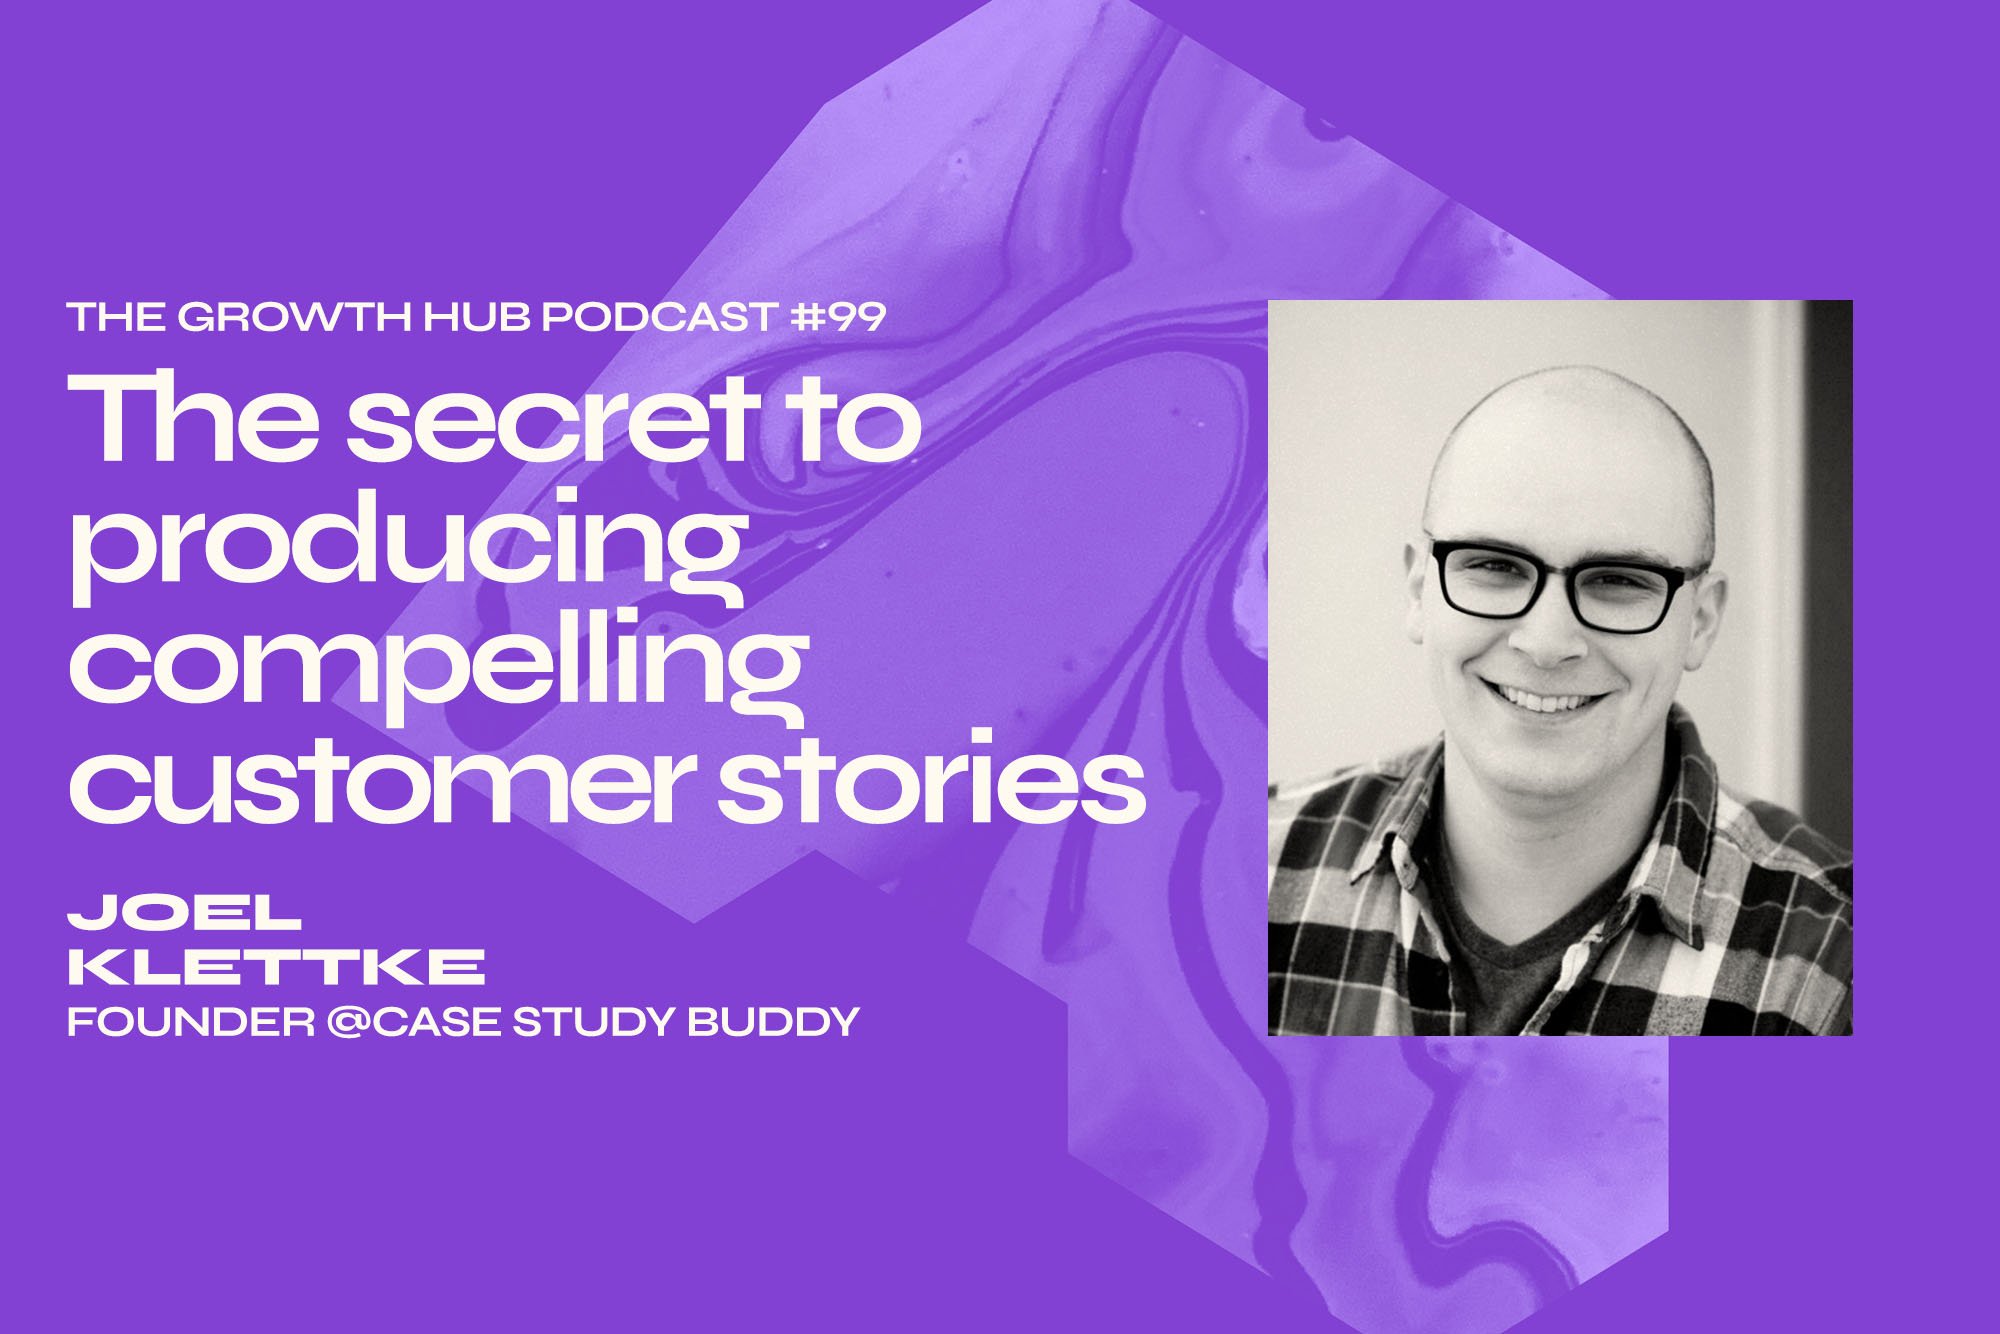 Customer Stories - The Secret to Producing Compelling Stories